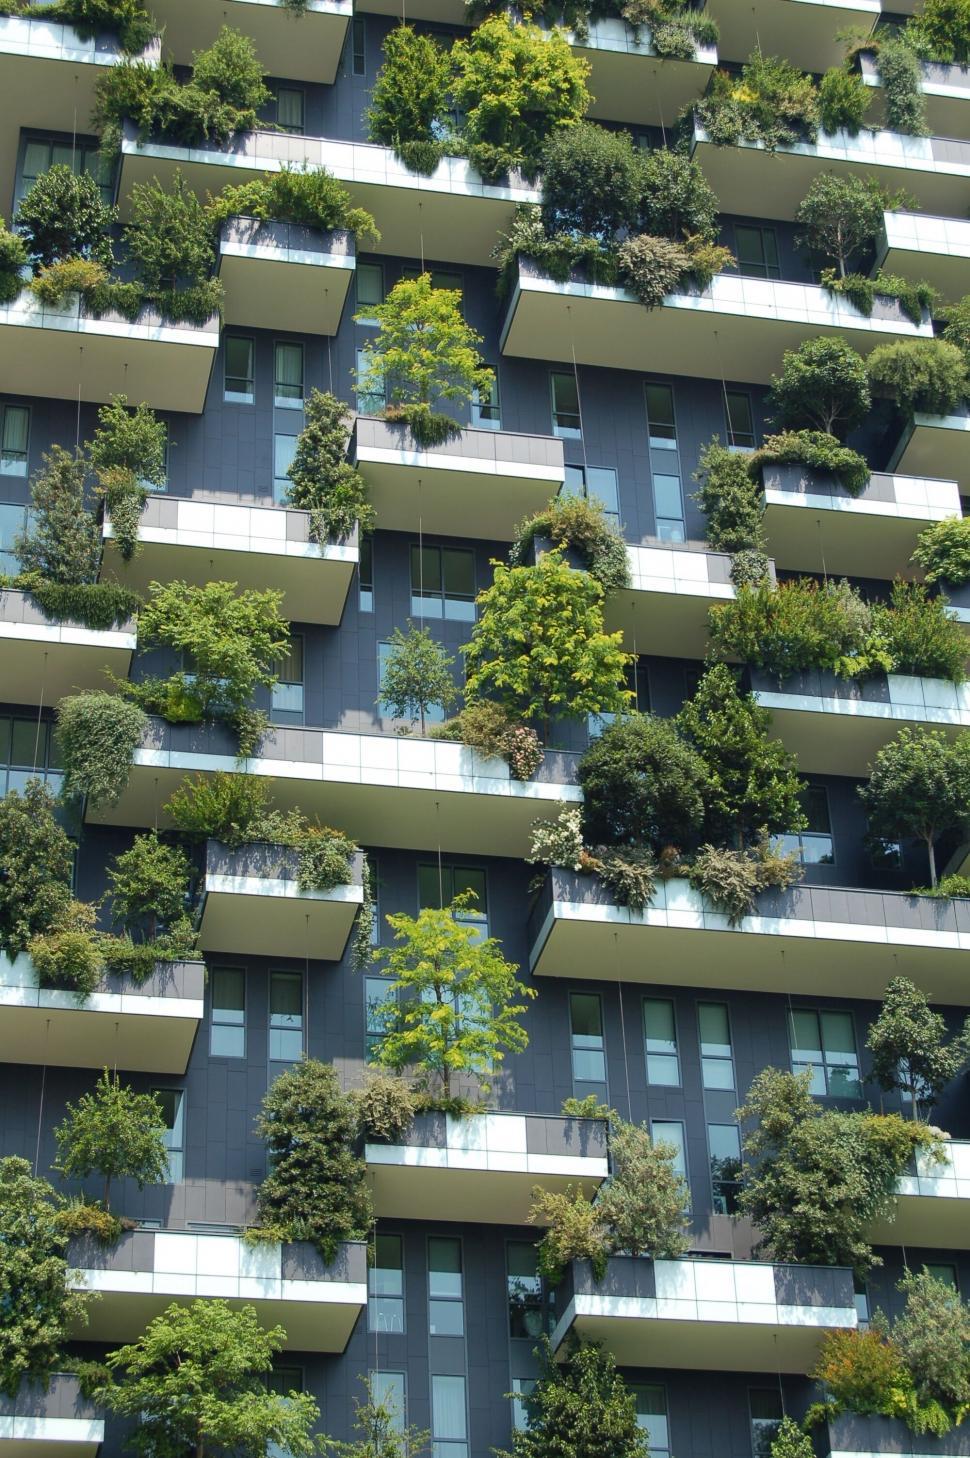 Free Image of Sustainable building with green balconies 